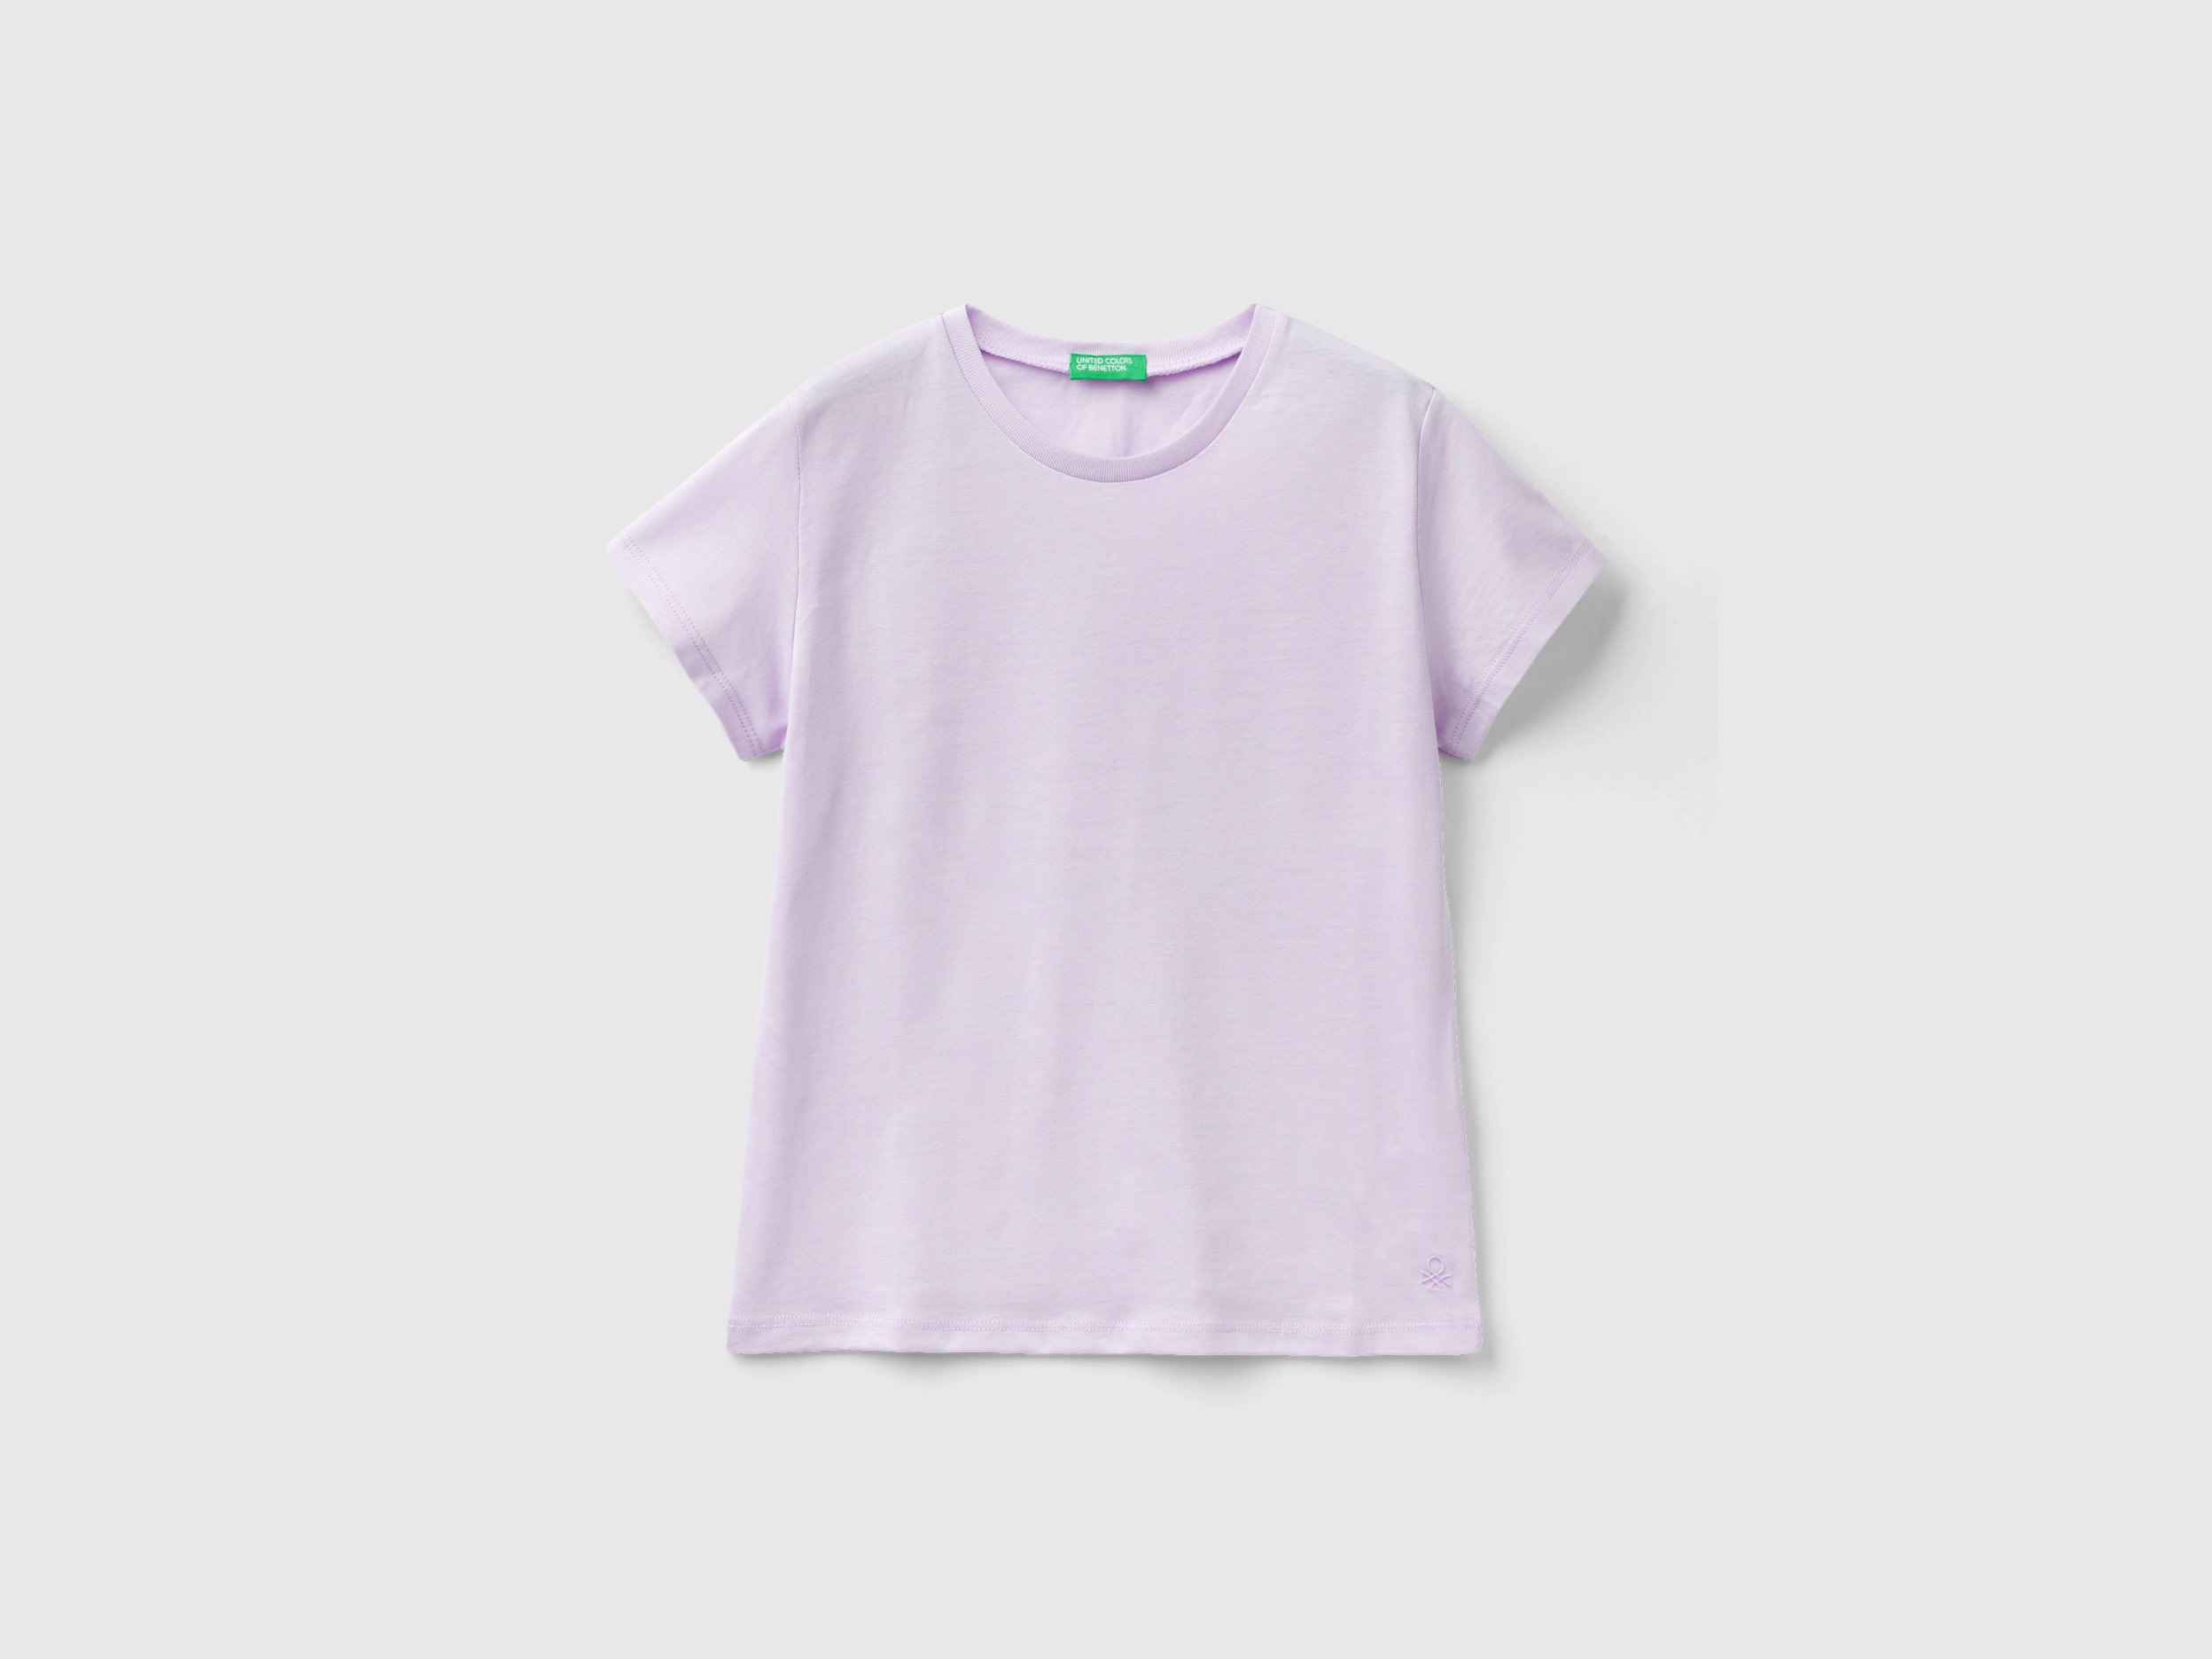 Image of Benetton, T-shirt In Pure Organic Cotton, size S, Lilac, Kids